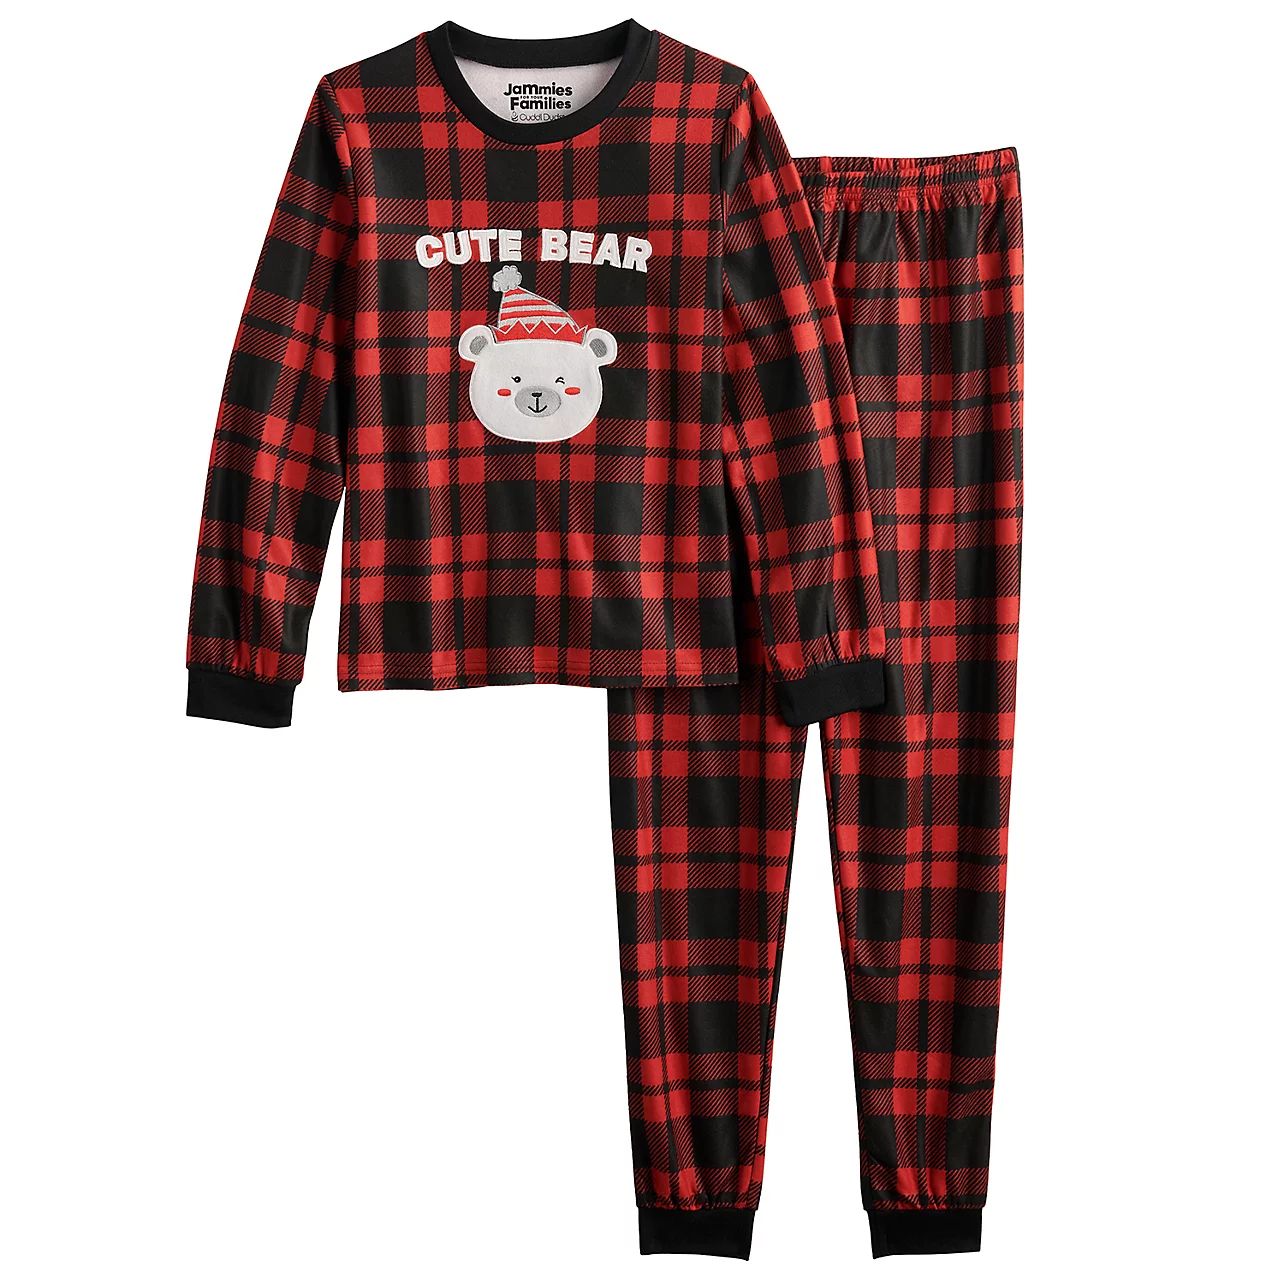 Girls 4-18 Jammies For Your Families® Cool Bear Plaid Pajama Set in Regular & Plus Size by Cuddl... | Kohl's